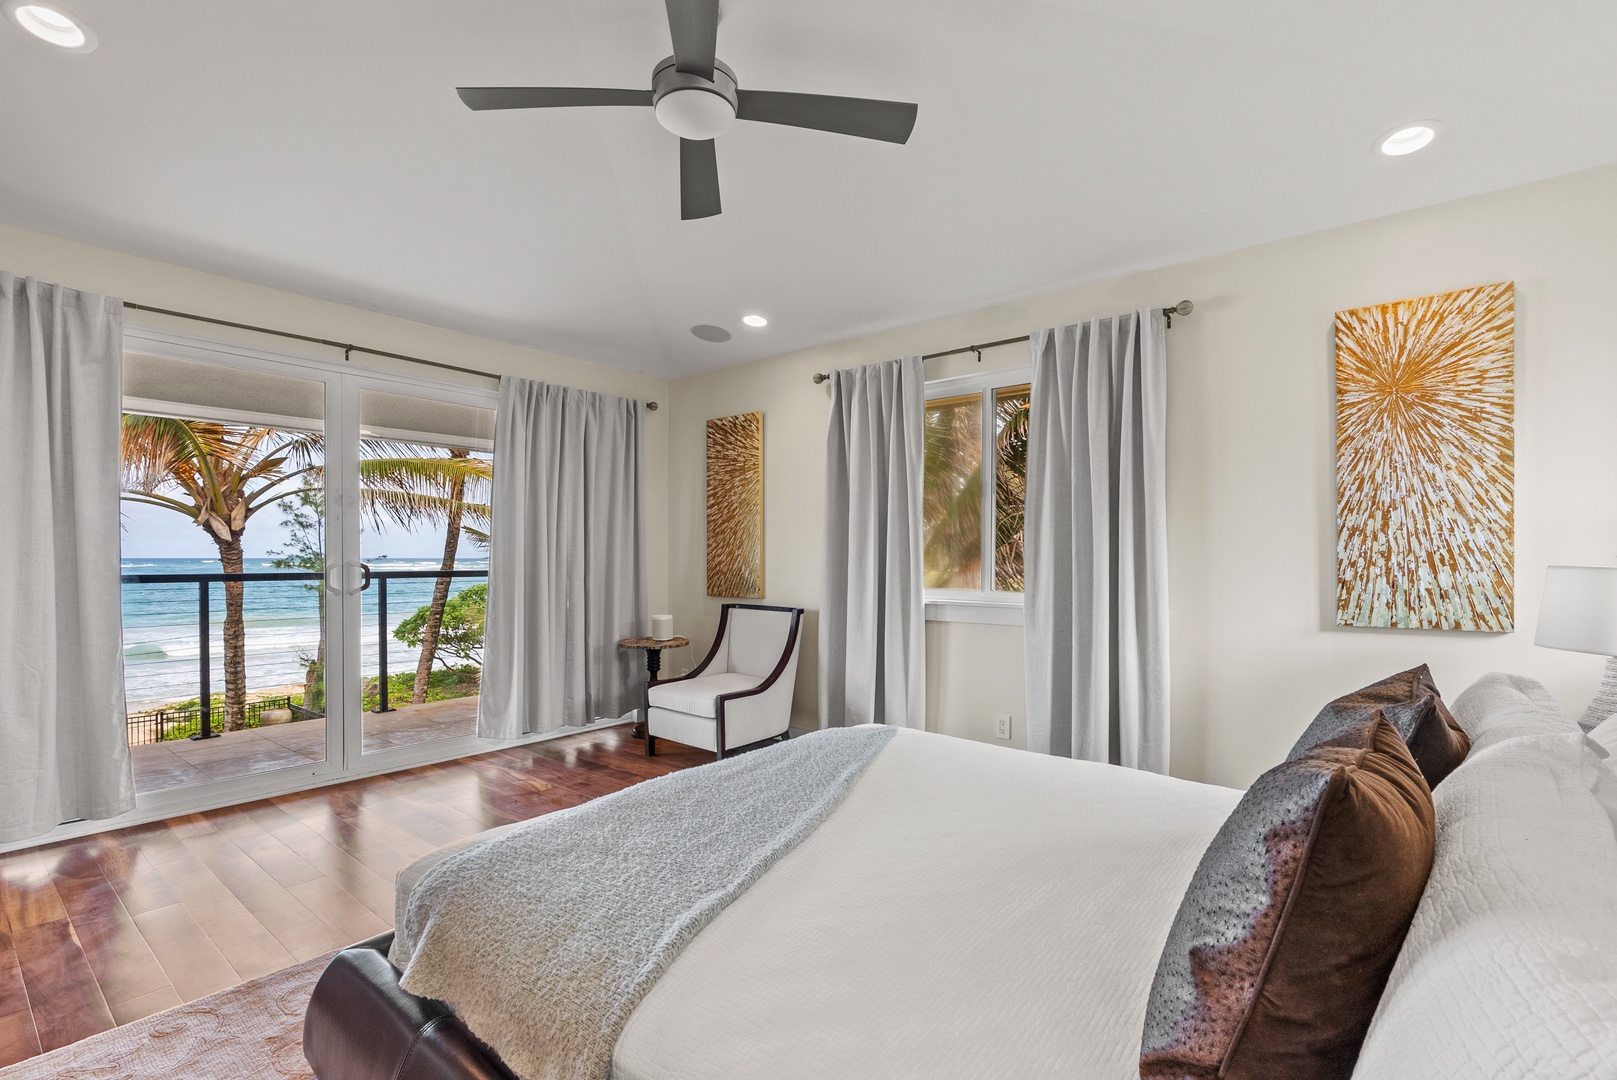 Laie Vacation Rentals, Laie Beachfront Estate - The primary suite in the upper level has large windows and ocean views.